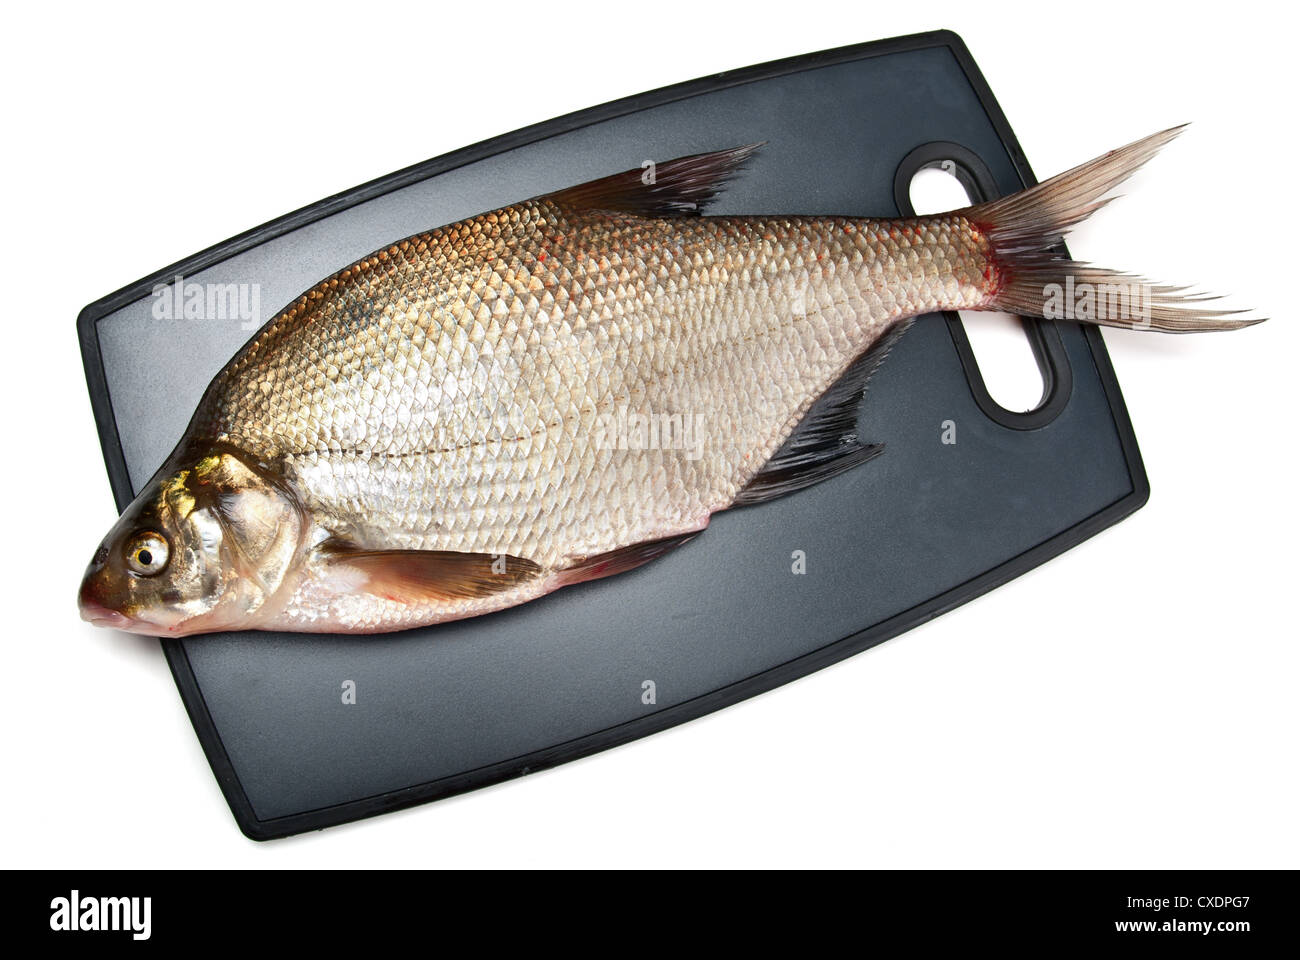 Fresh fish bream on a cutting board on a white background Stock Photo